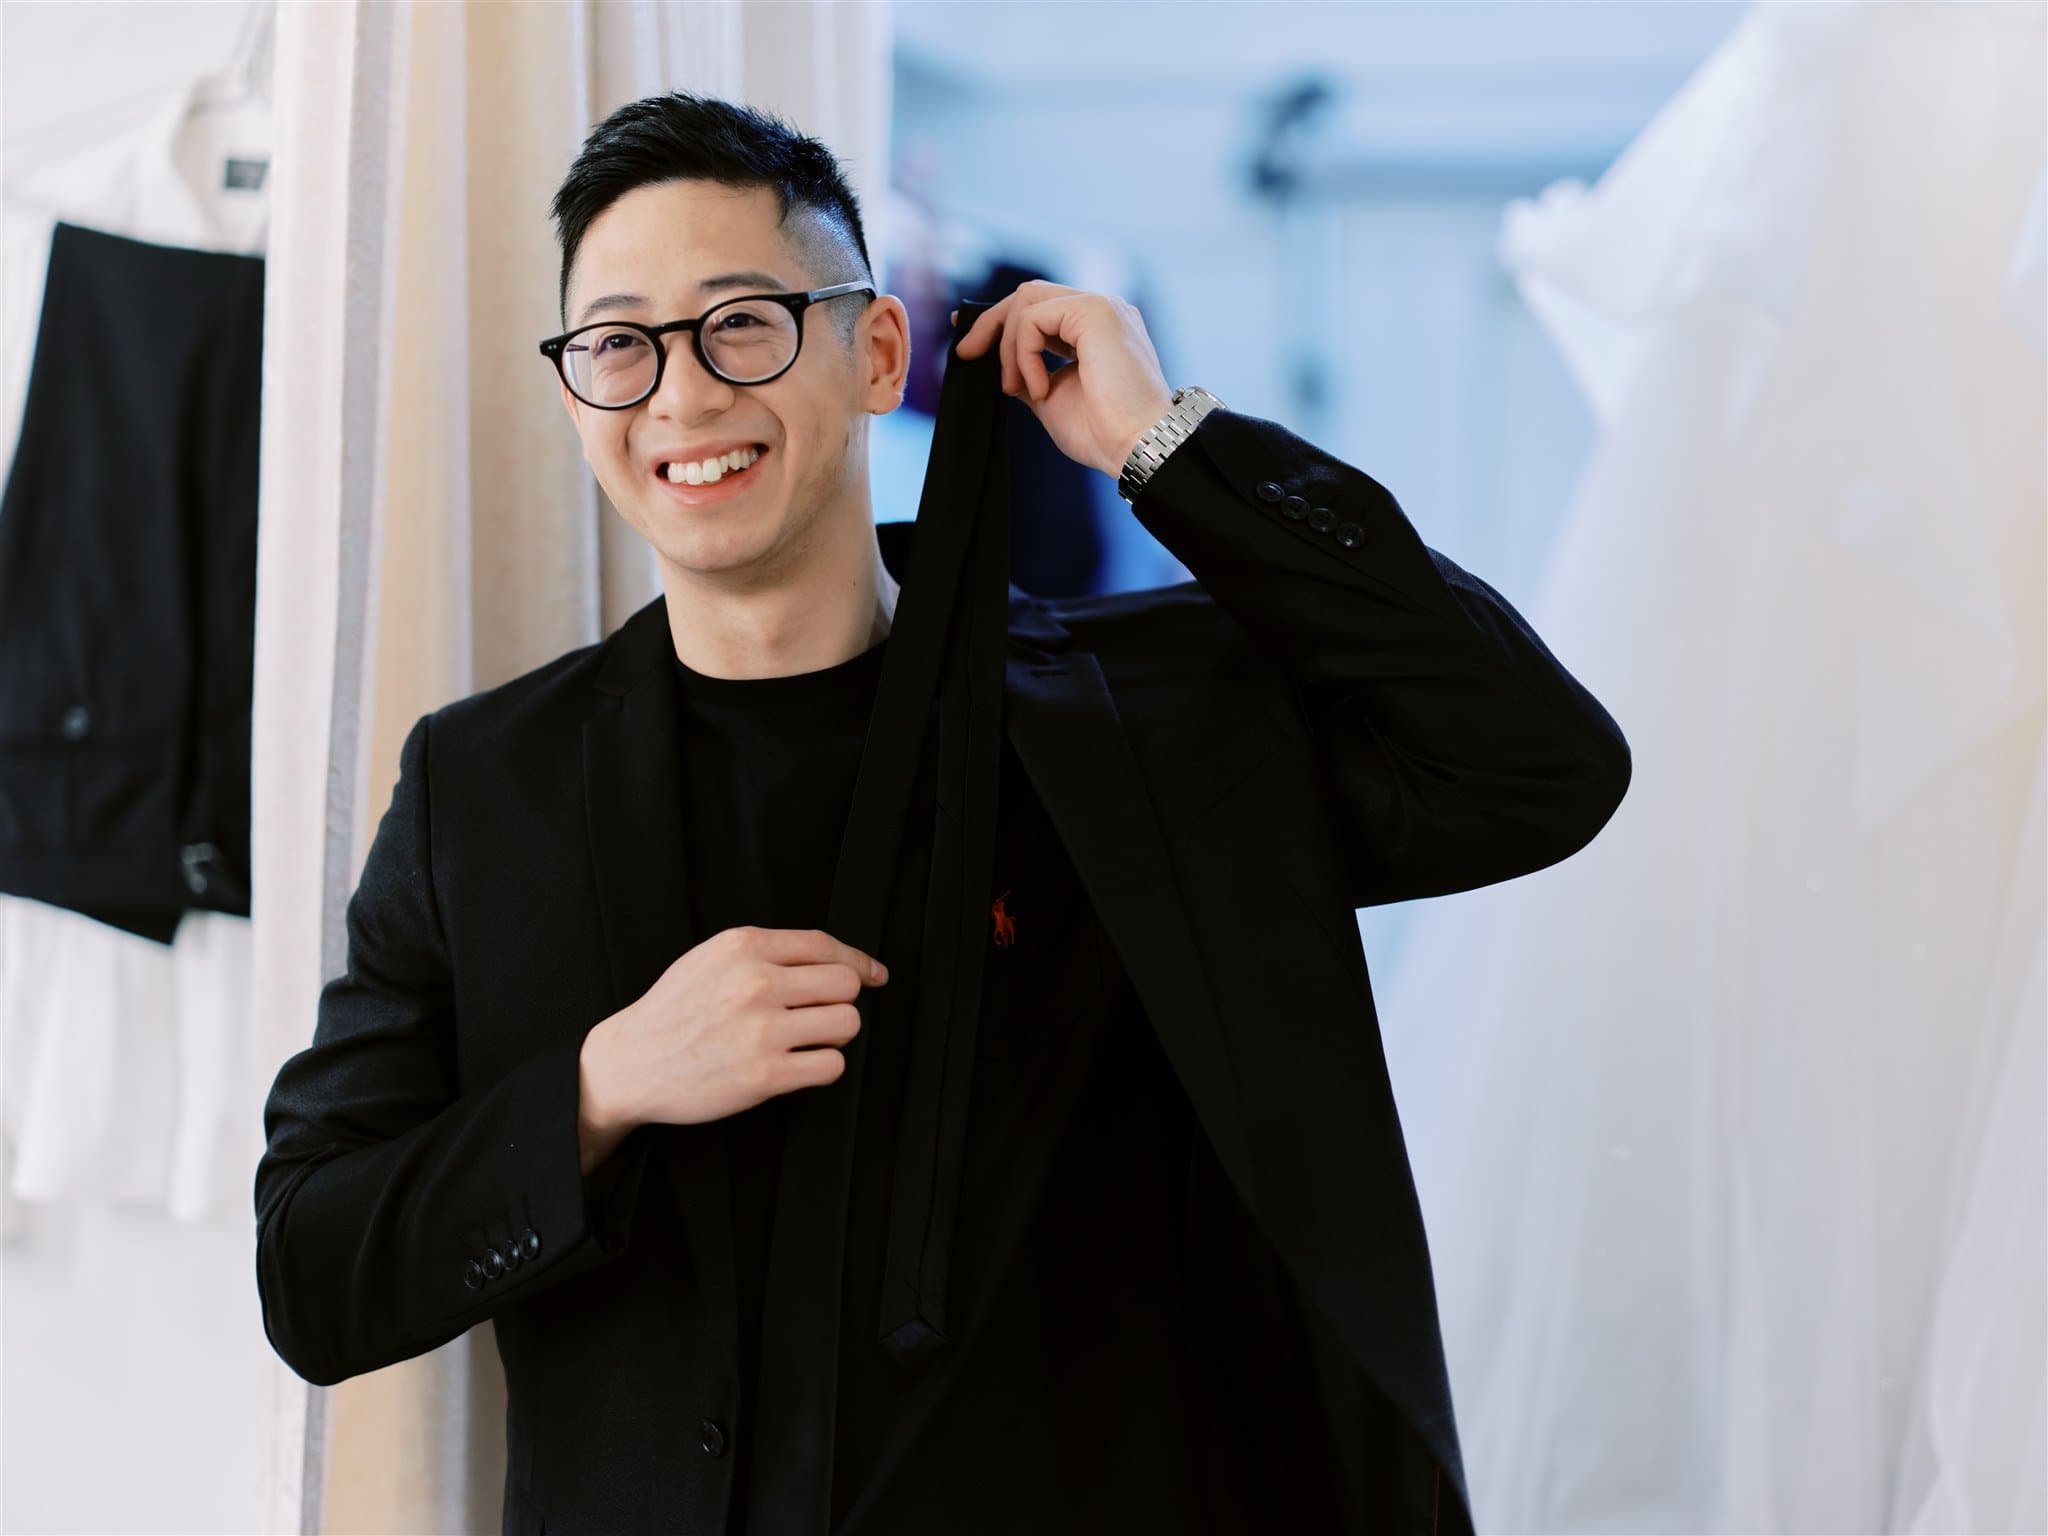 Kyoto Tokyo Japan Elopement Wedding Photographer, Planner & Videographer | A man wearing glasses and a suit in a dress shop searching for the perfect attire for his Japan elopement.